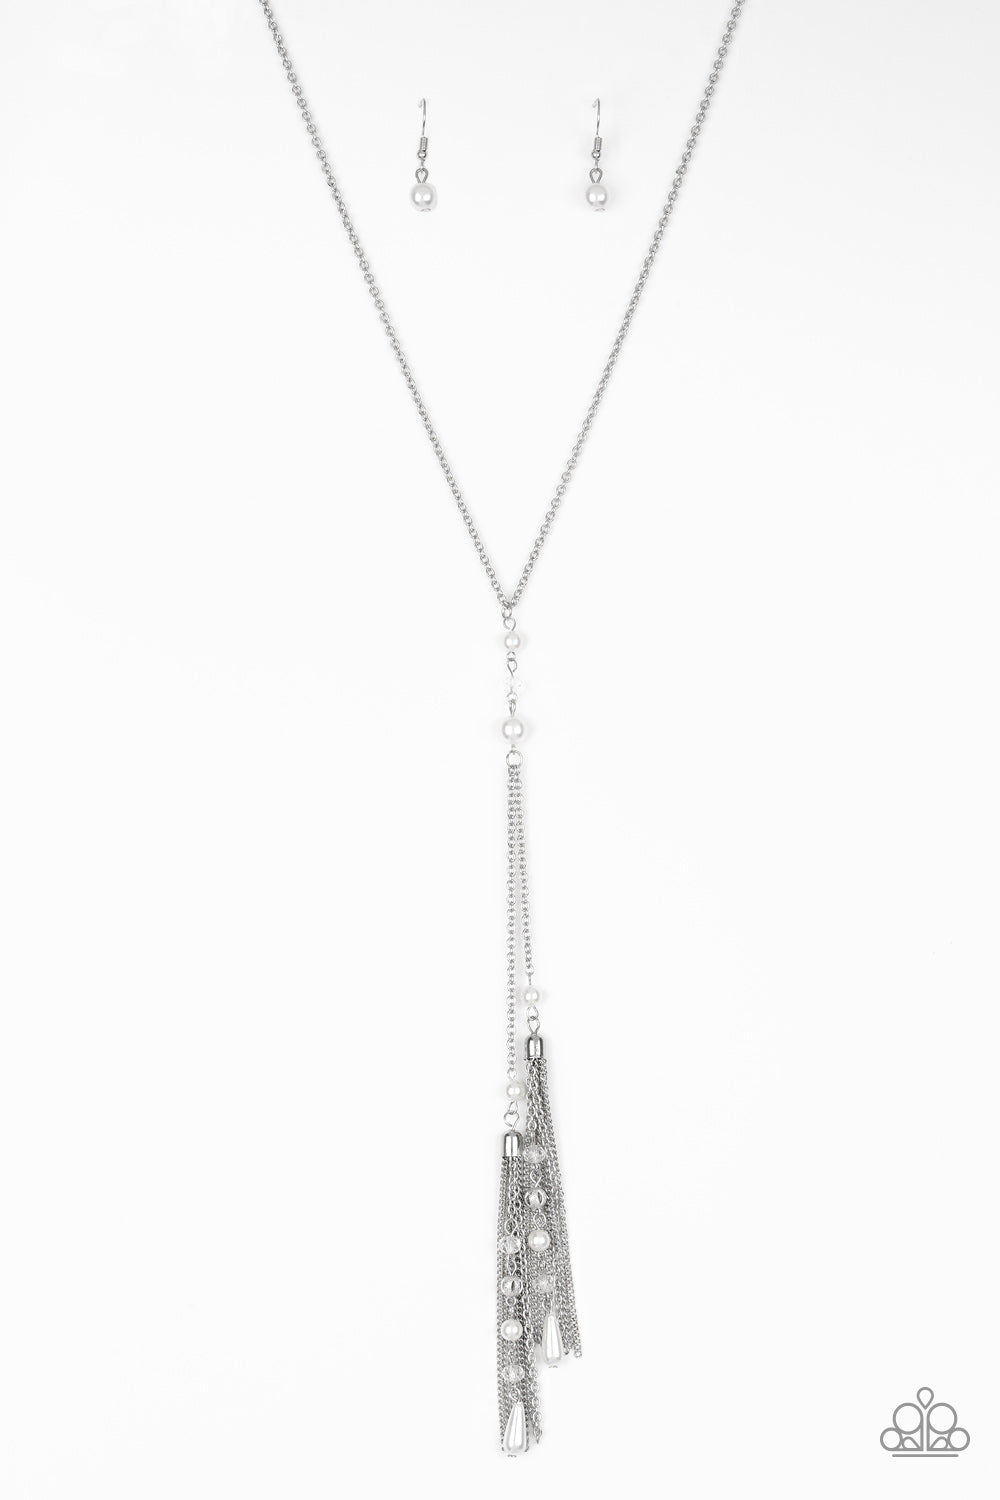 Timeless Tassels Paparazzi Necklace with Earrings Silver